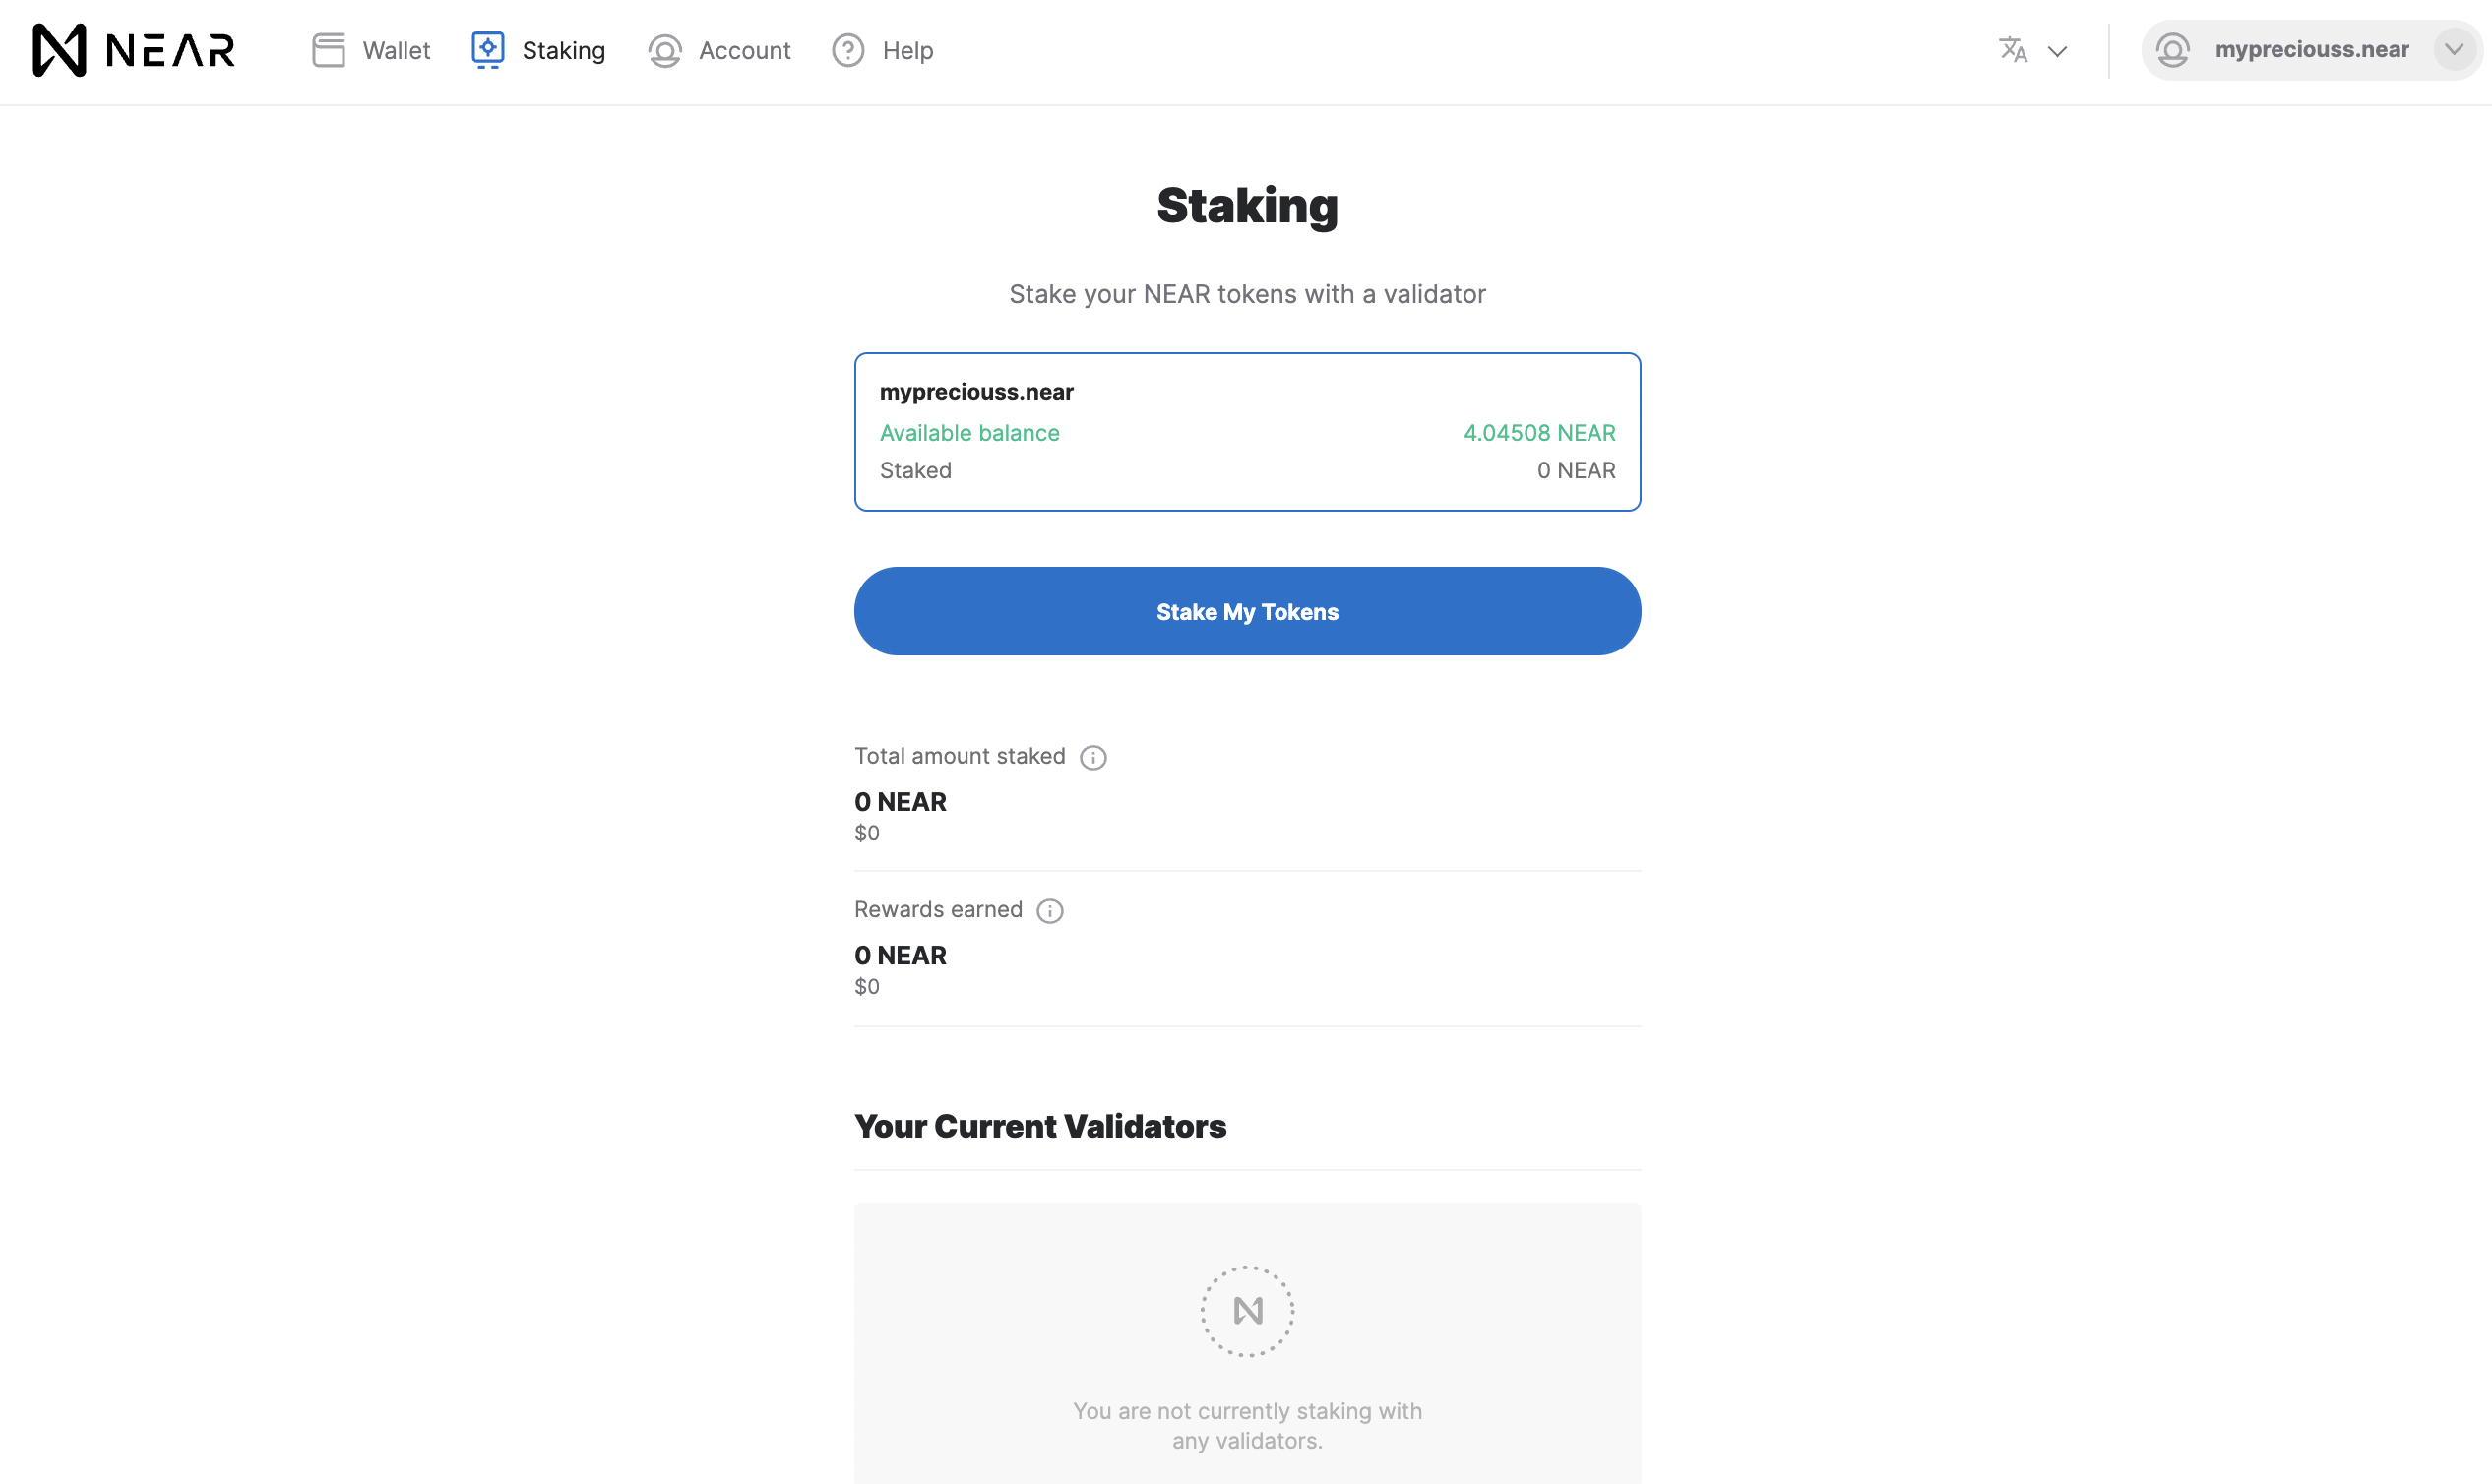 Staking your NEAR tokens